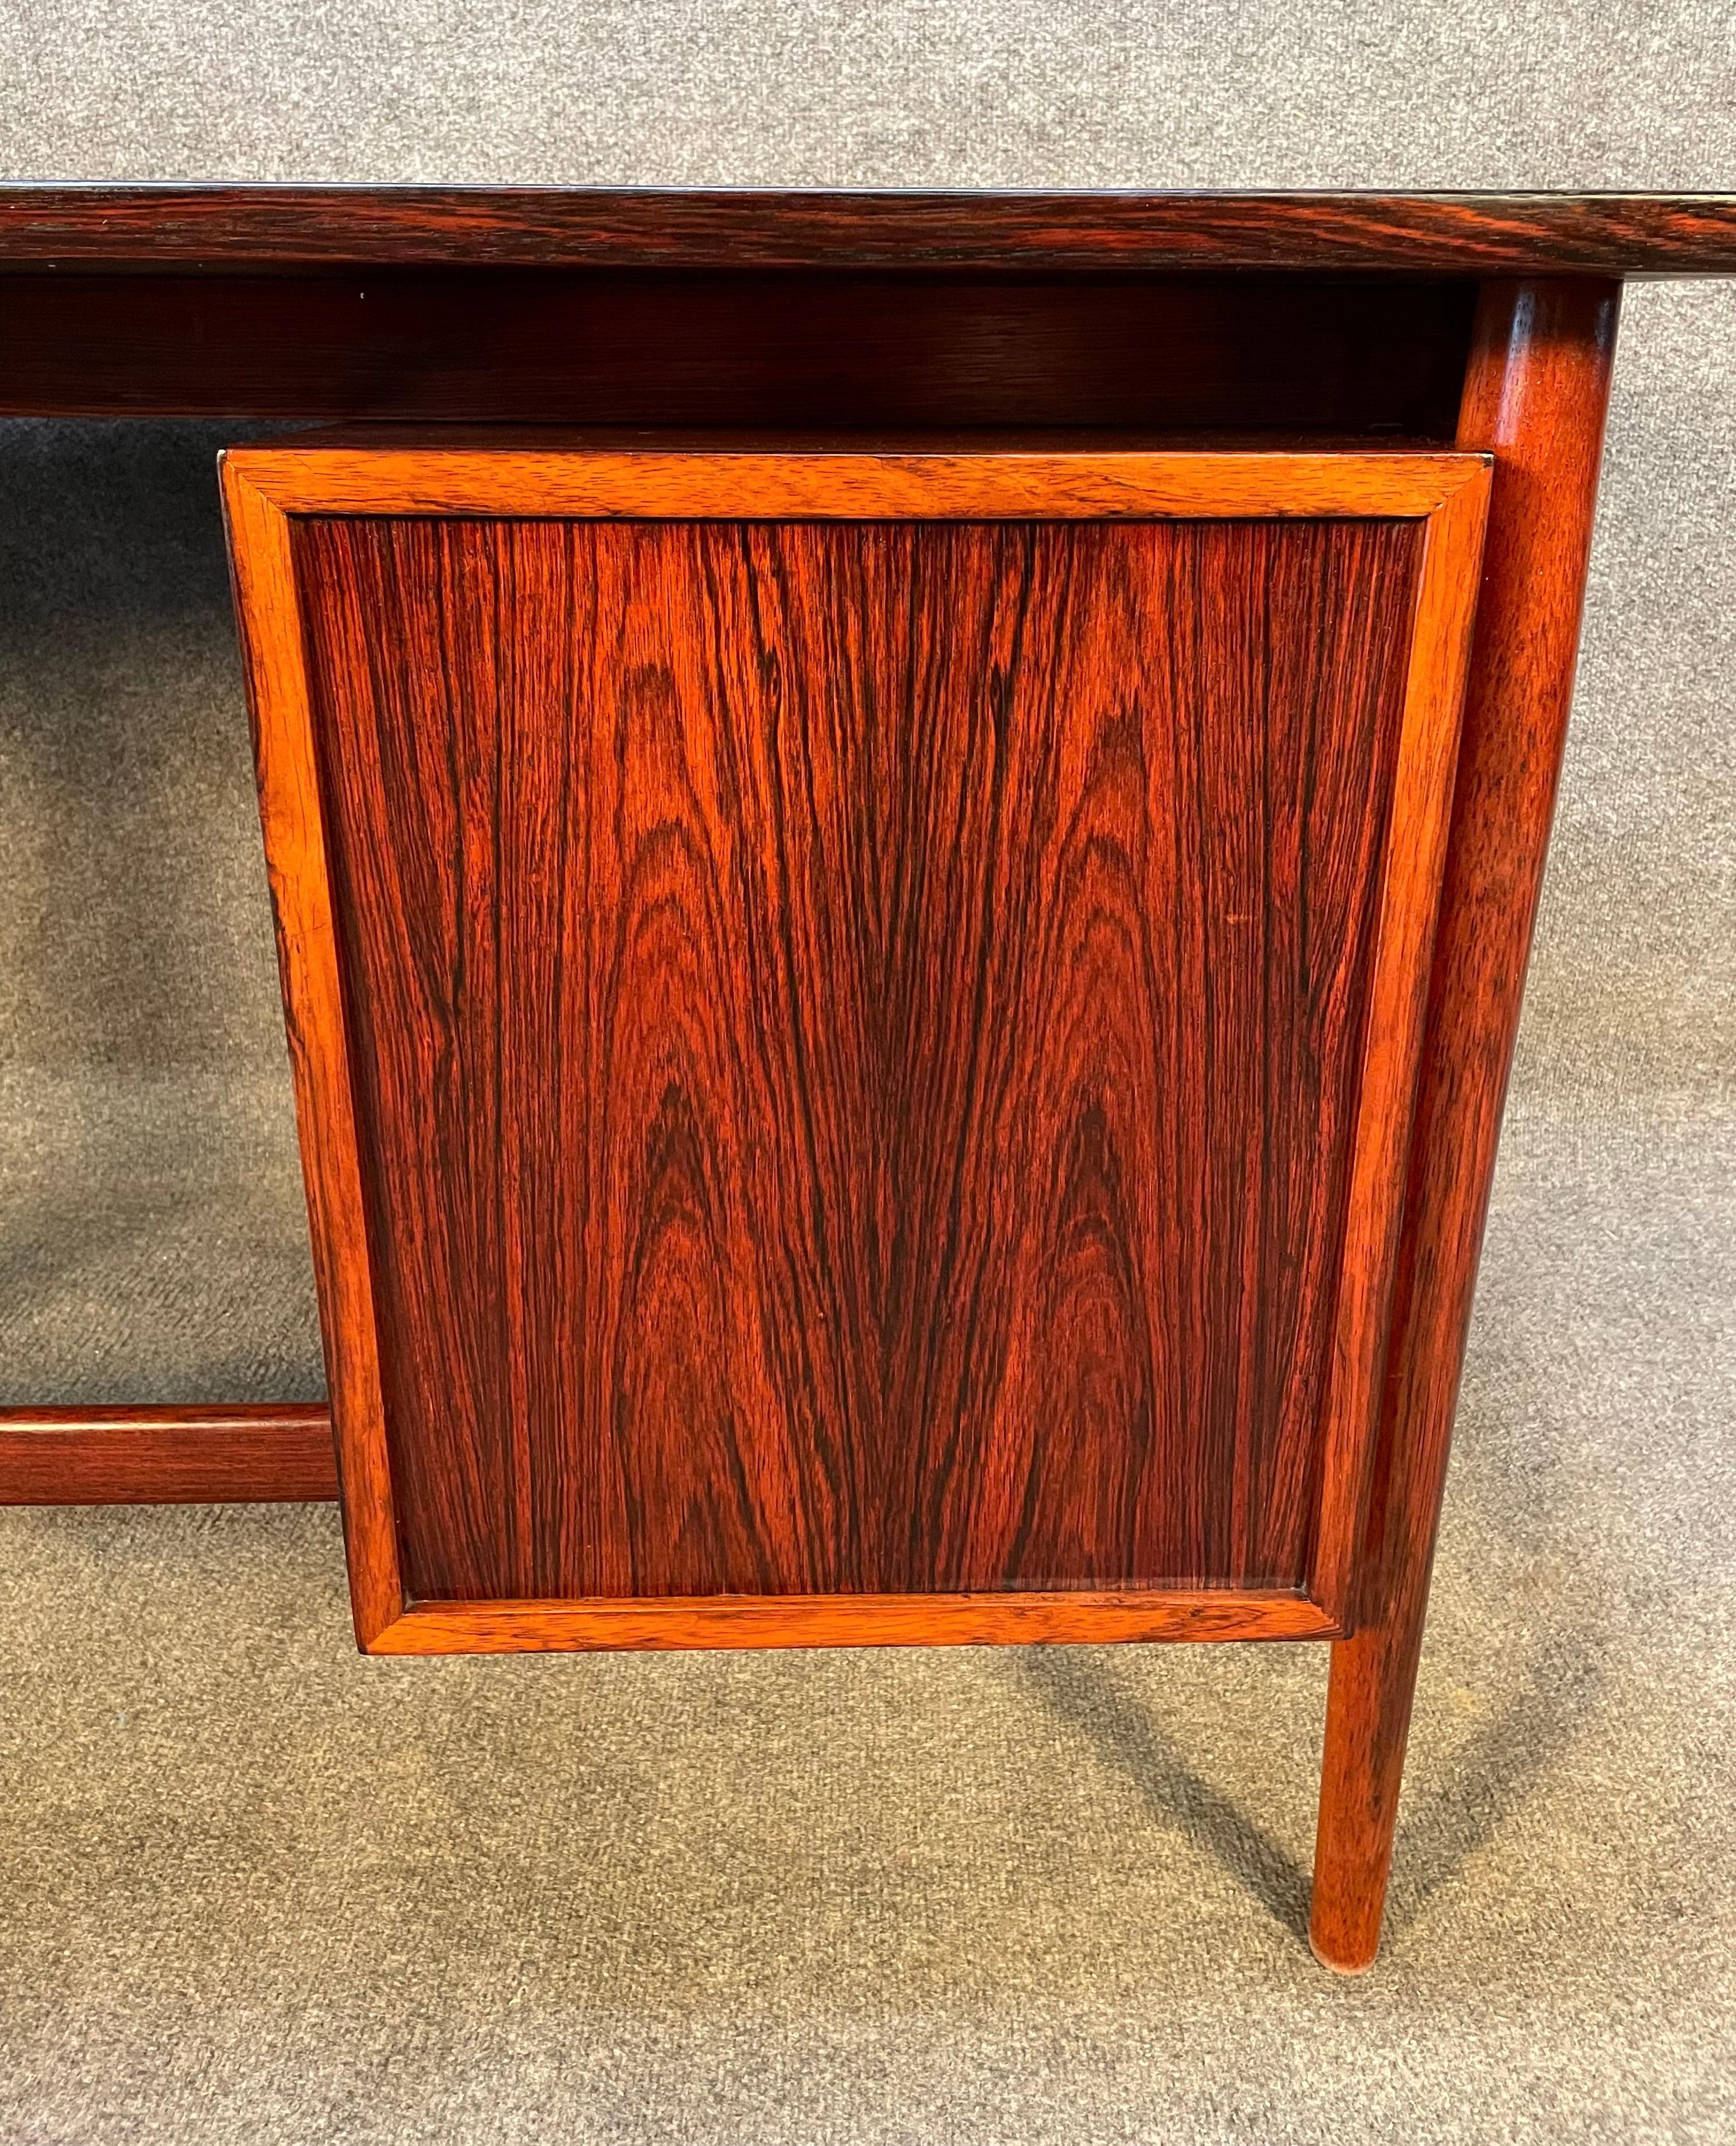 Here is a beautiful and rare compact writing desk in rosewood designed by master Arne Vodder and manufactured by Helge Sibast in Denmark in the 1960s.
This stunning desk, recently imported from Europe to California before its refinishing, features